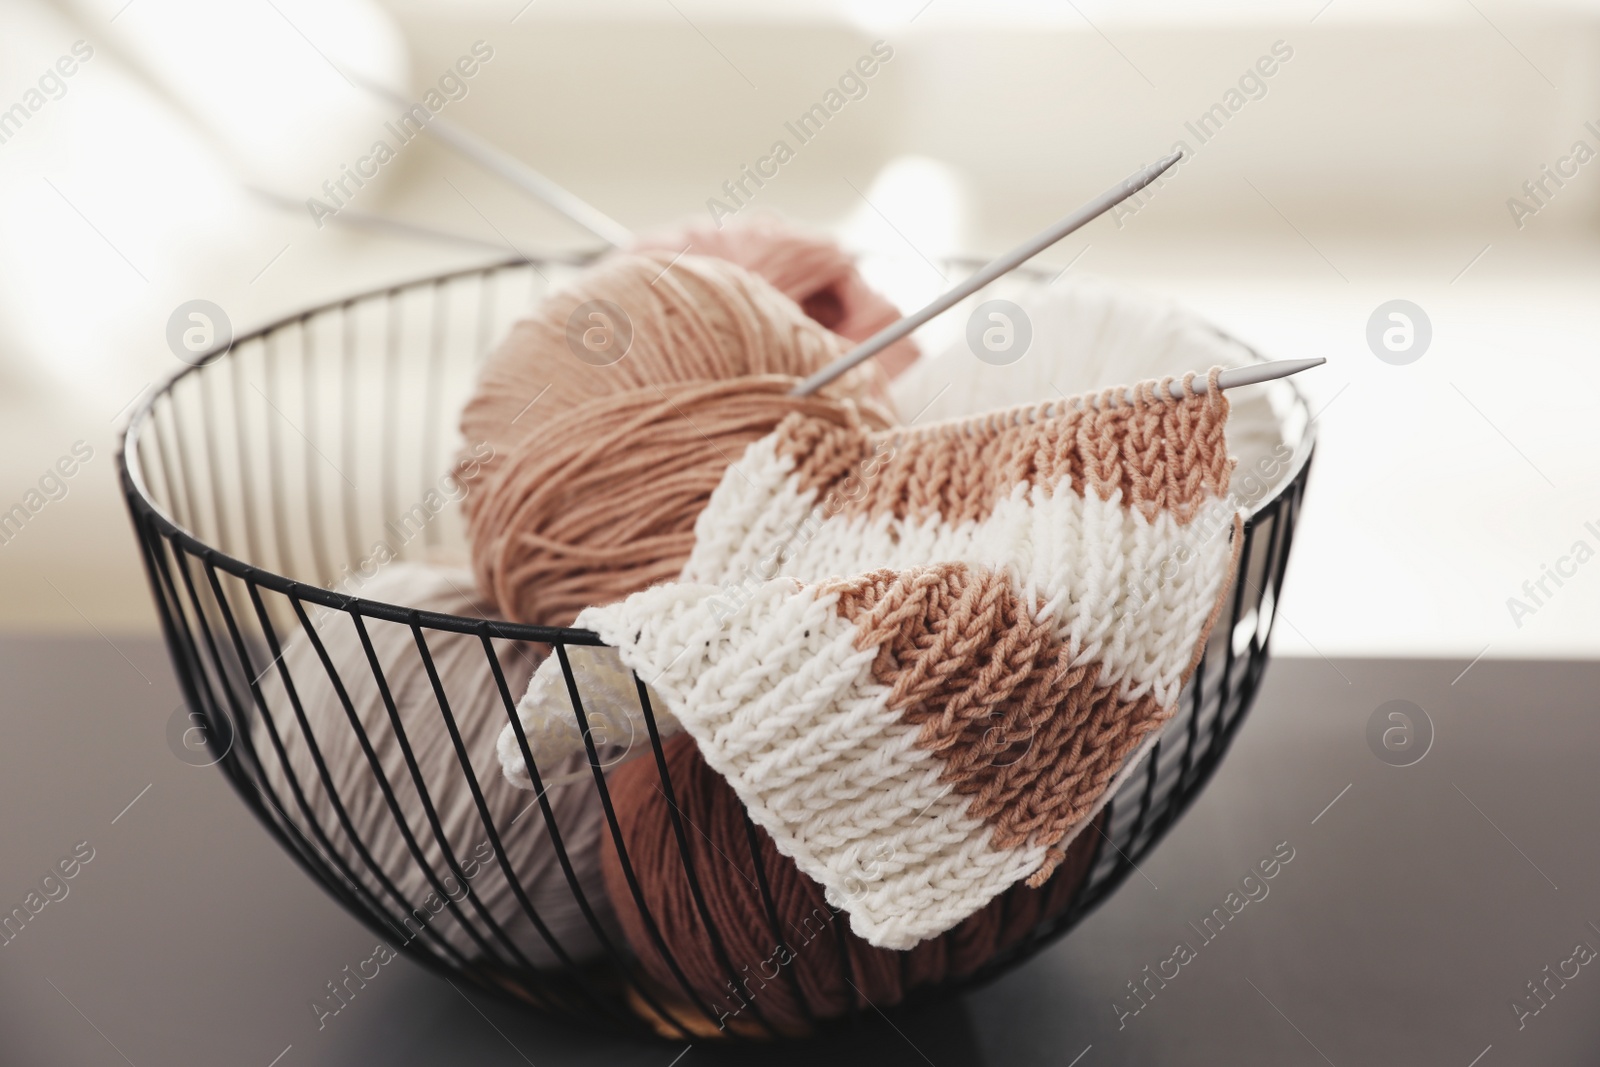 Photo of Yarn balls and knitting needles in metal basket on grey table against blurred background. Creative hobby